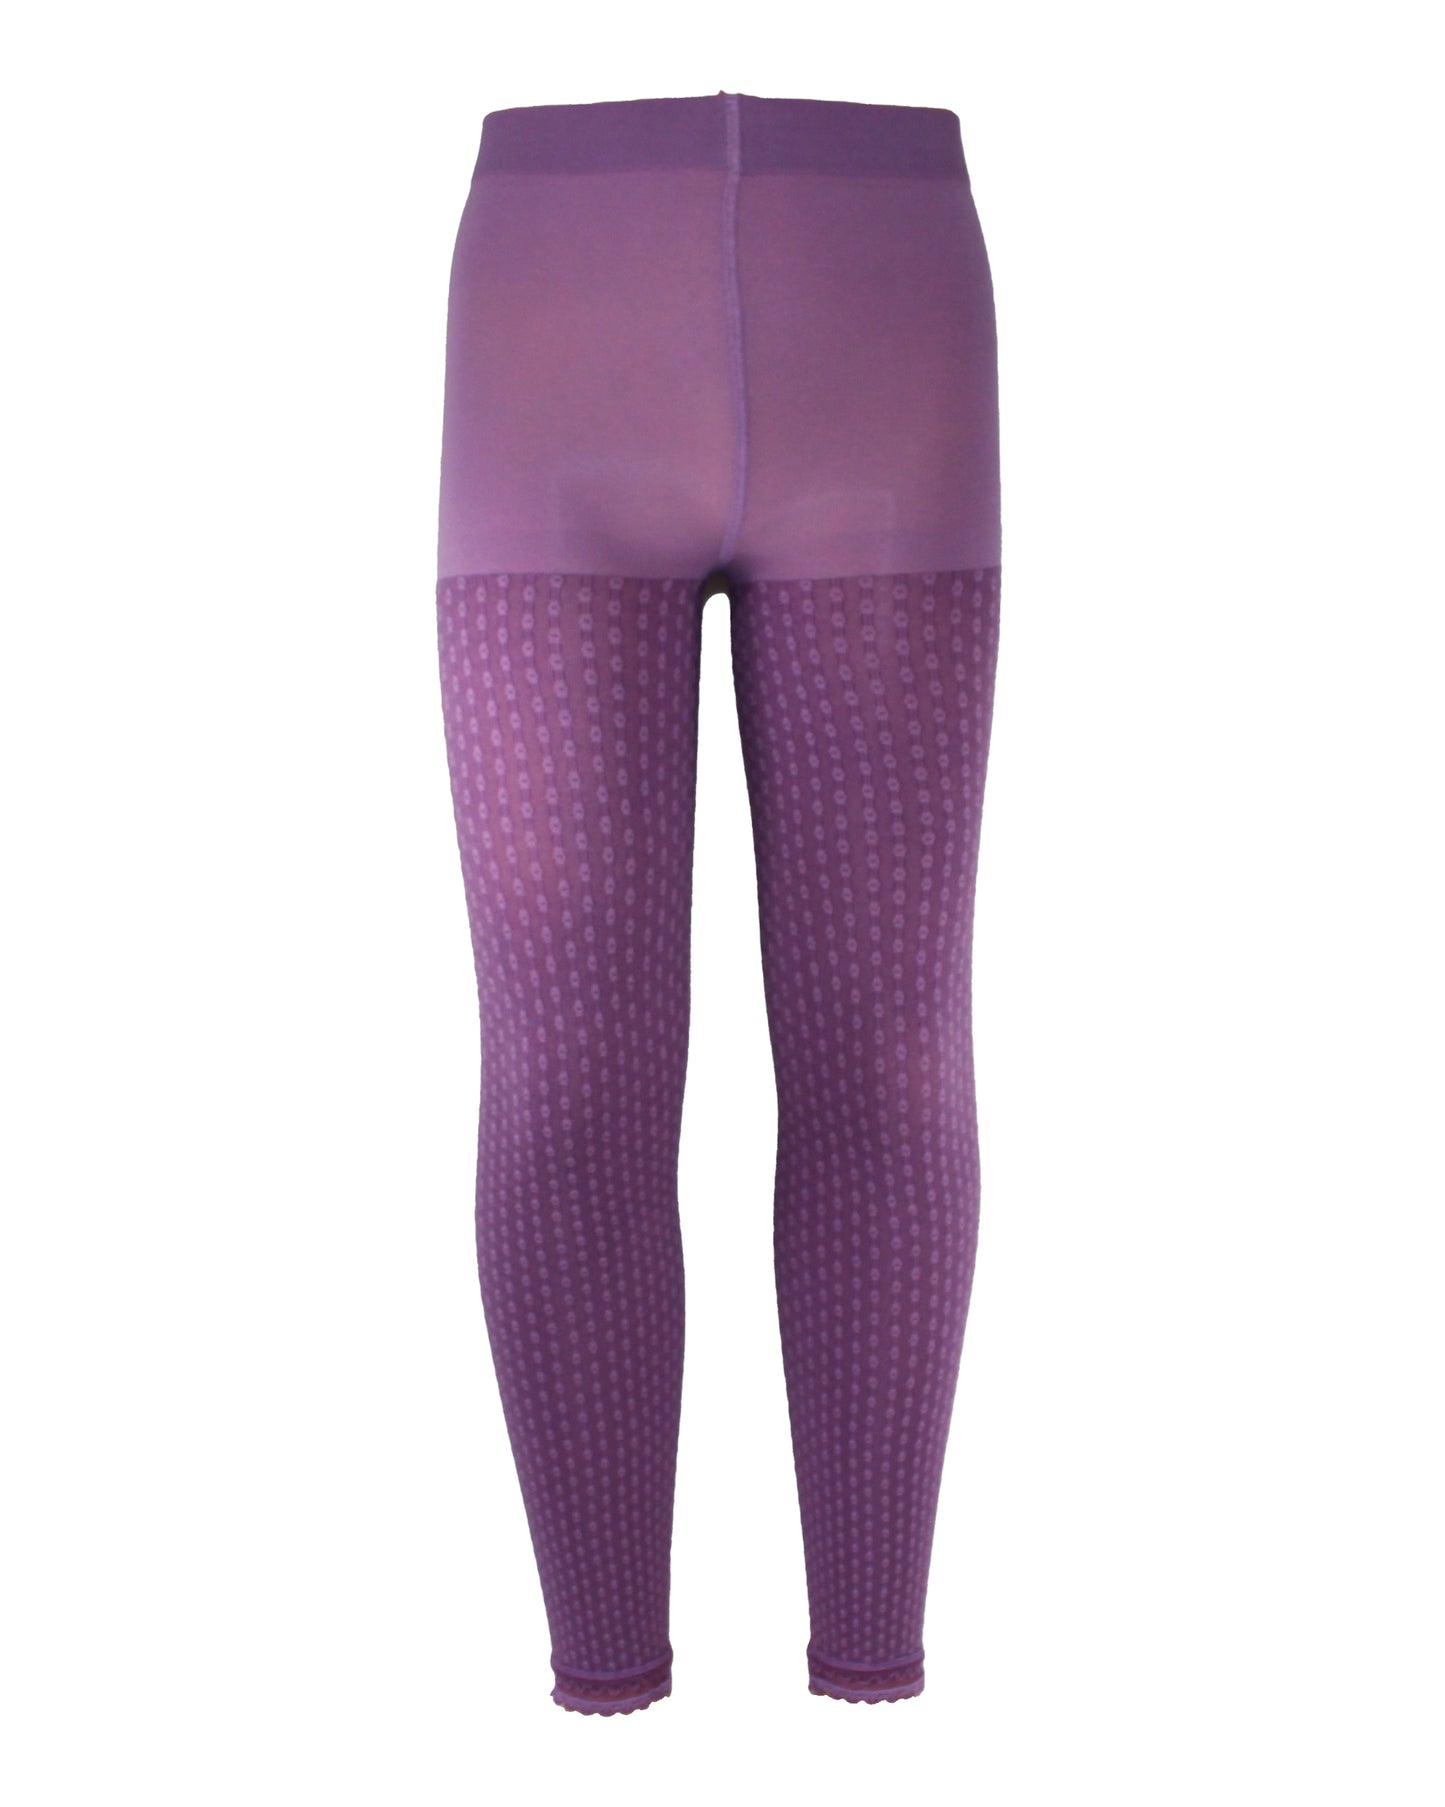 Omsa Caramel Pantacollant - Soft opaque purple footless tights with a textured floral pinstripe pattern and lace trim cuff.